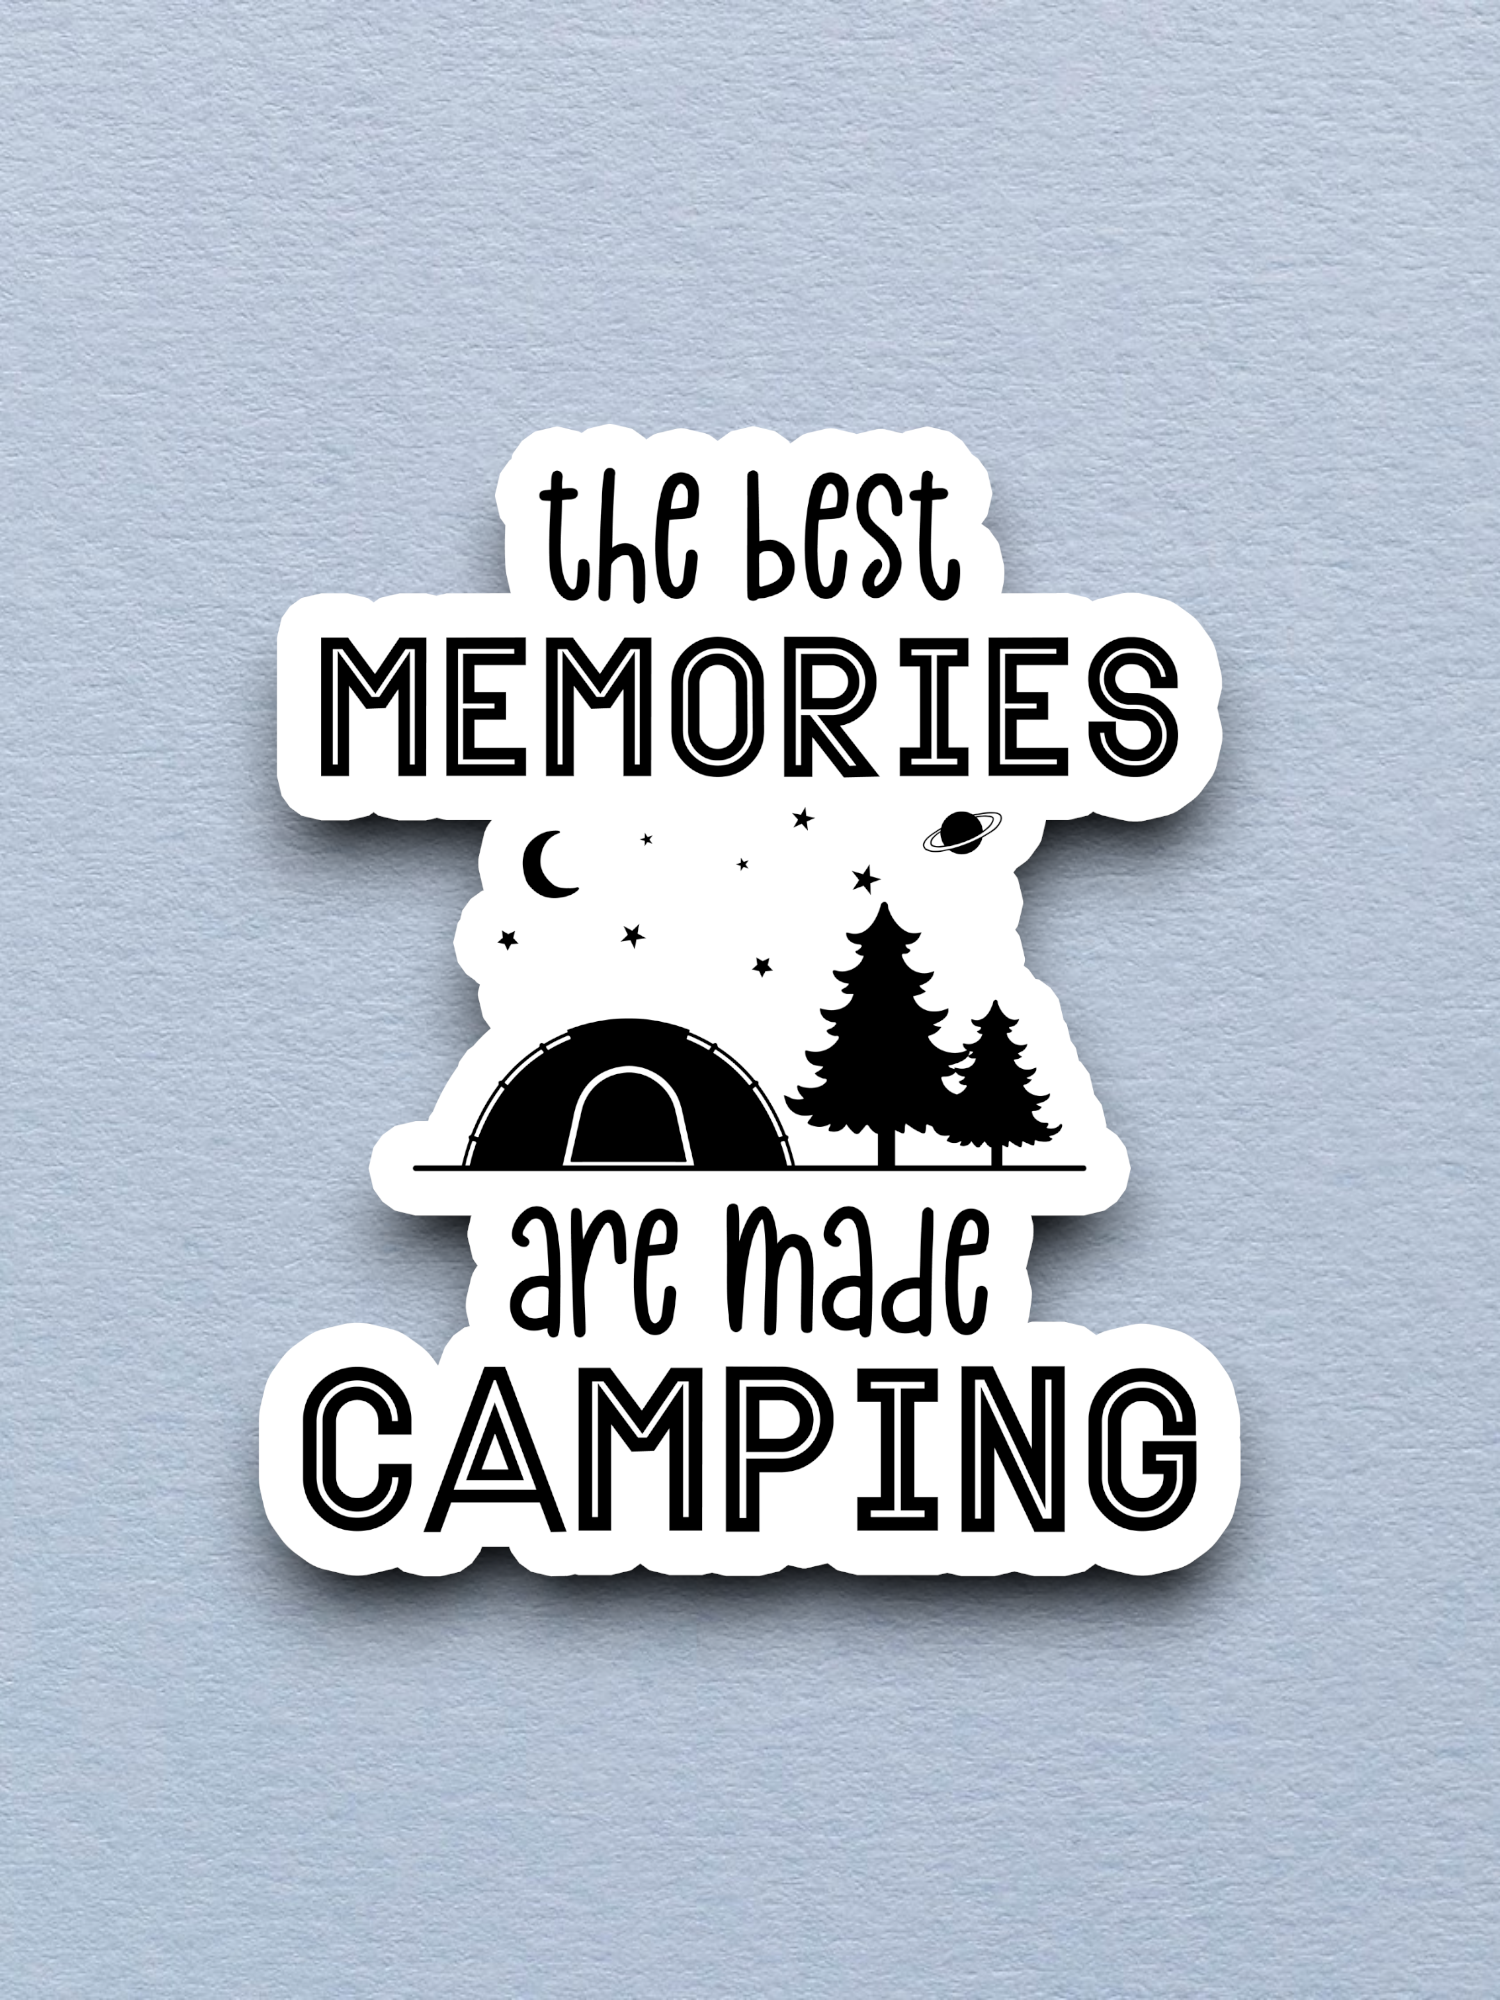 The Best Memories Are Made Camping  1 - Travel Sticker